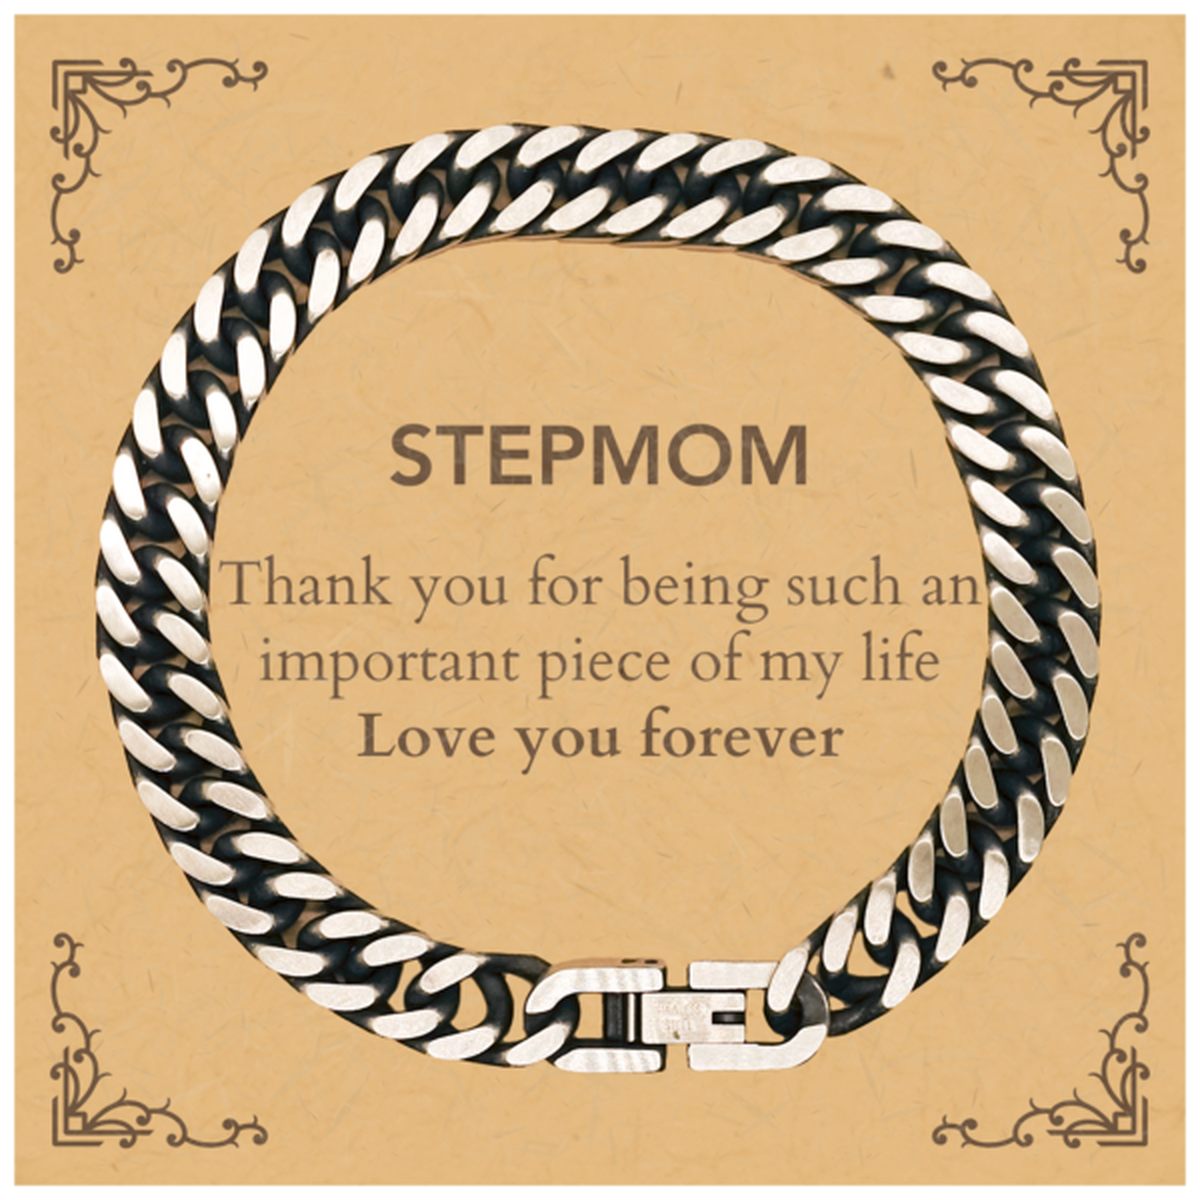 Appropriate Stepmom Cuban Link Chain Bracelet Epic Birthday Gifts for Stepmom Thank you for being such an important piece of my life Stepmom Christmas Mothers Fathers Day